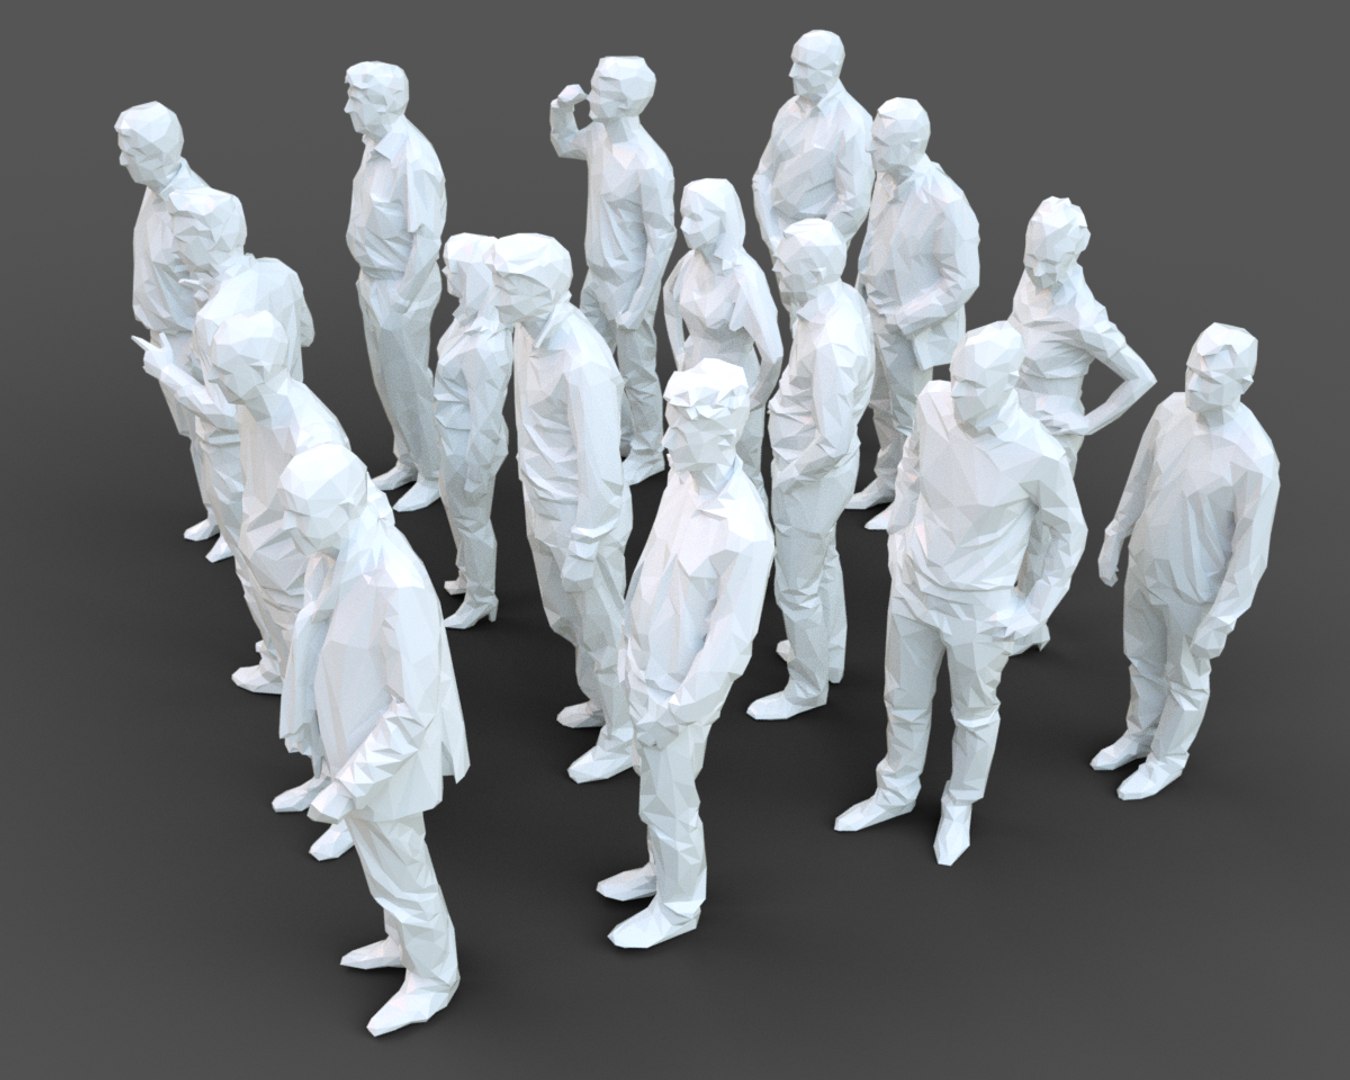 3D Architectural Stylized Human Character Model | 1147650 | TurboSquid